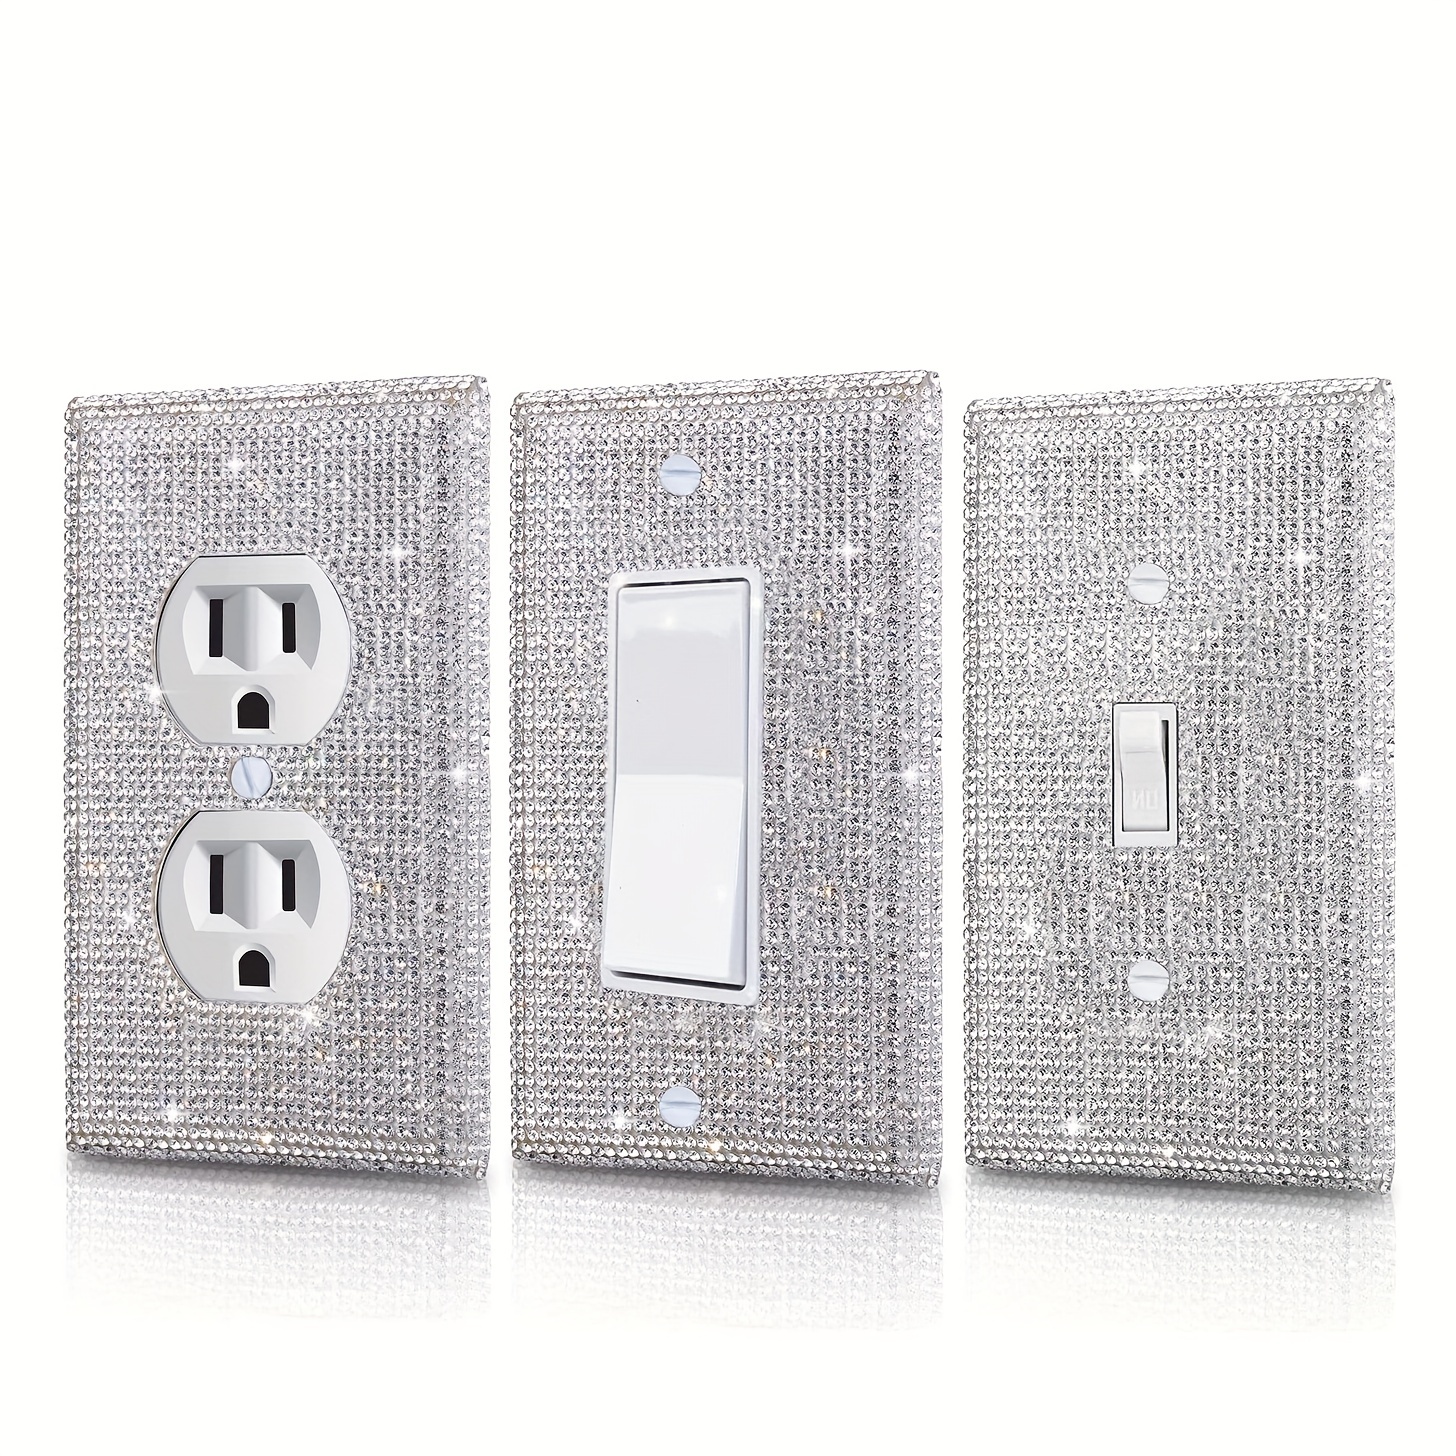 

Shiny Silvery Rhinestones Wall Plates Light Switch Cover Duplex Switch Cover, 1 Rocker/ Single Toggle Switch Cover